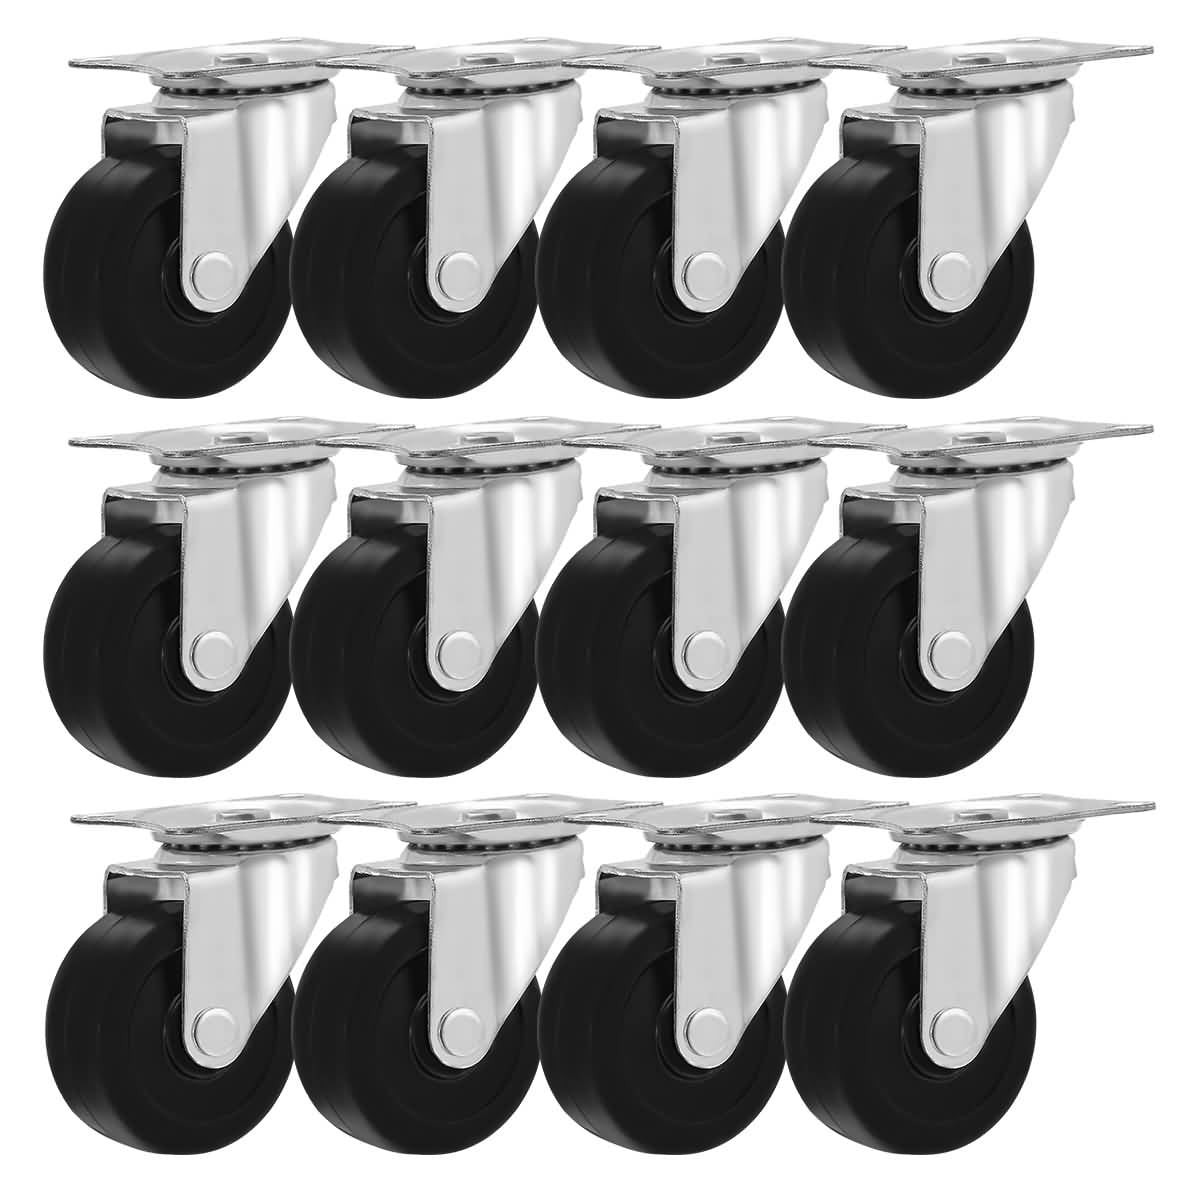 Widesakll 12 Pieces 2" inch Swivel Caster Wheels Hard Rubber Base with Top Plat 